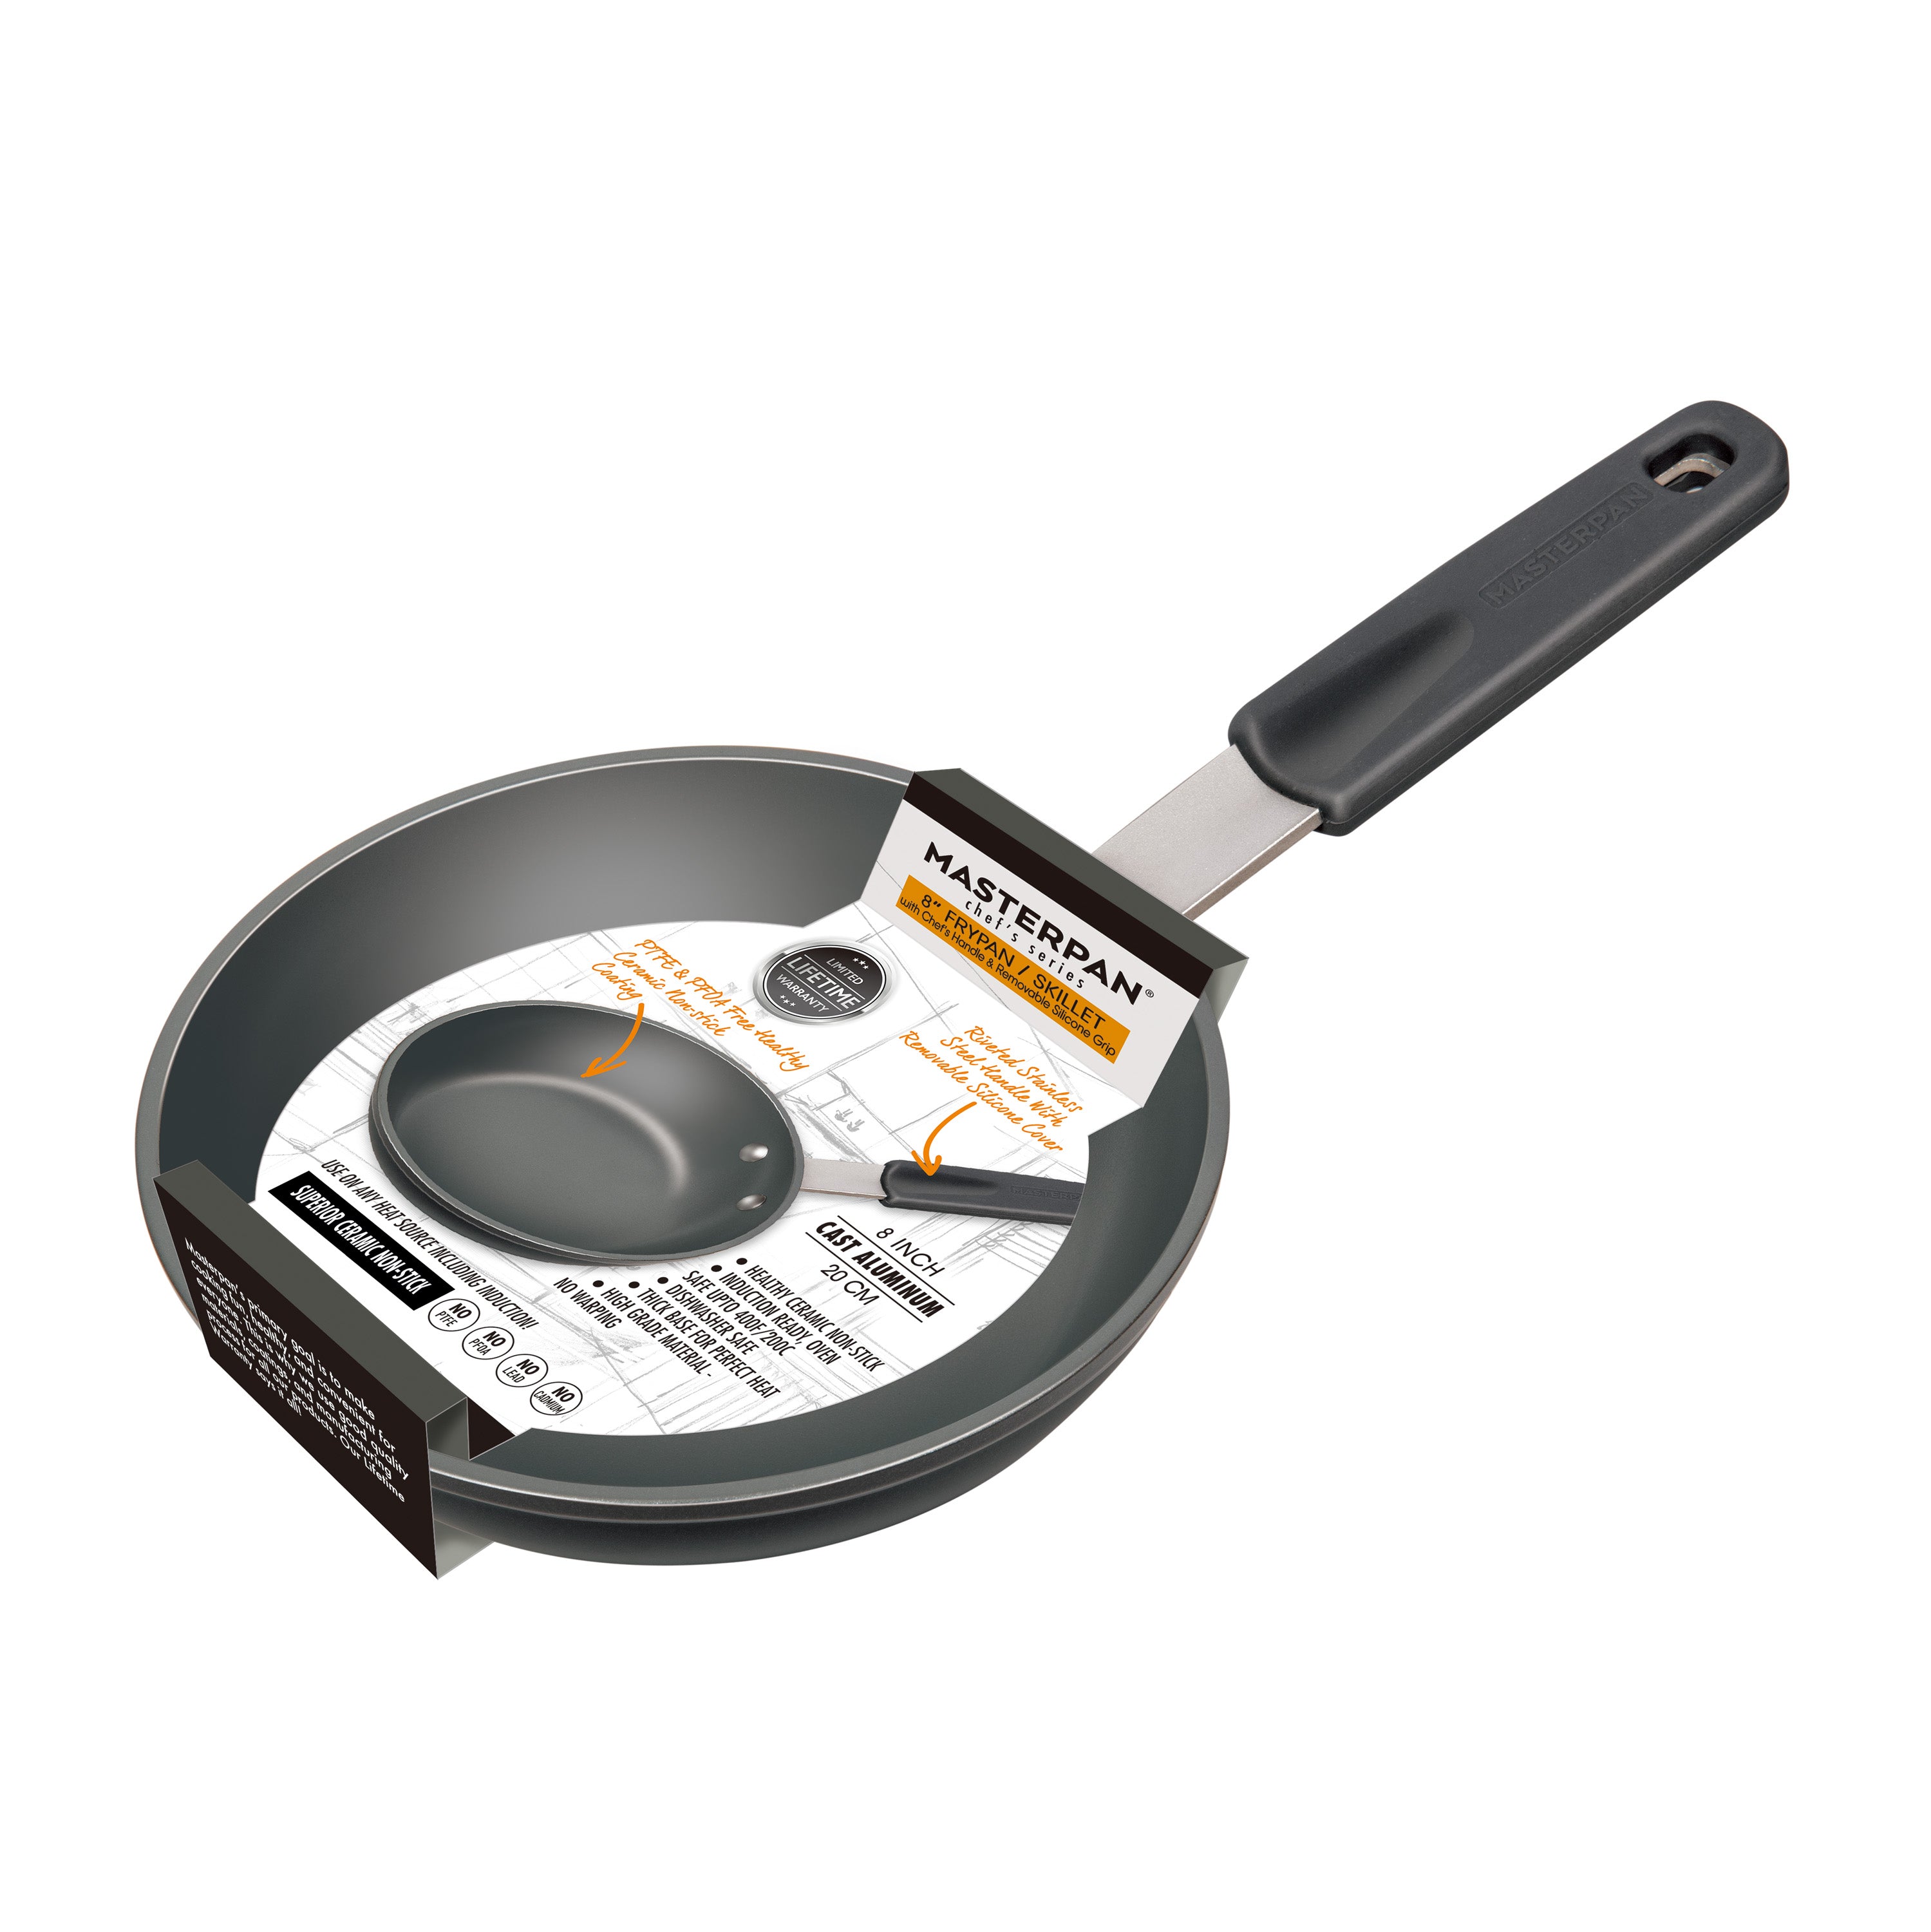 FRY PAN & SKILLET, HEALTHY CERAMIC NON-STICK ALUMINIUM COOKWARE WITH STAINLESS STEEL CHEF’S HANDLE, 8” (20cm)